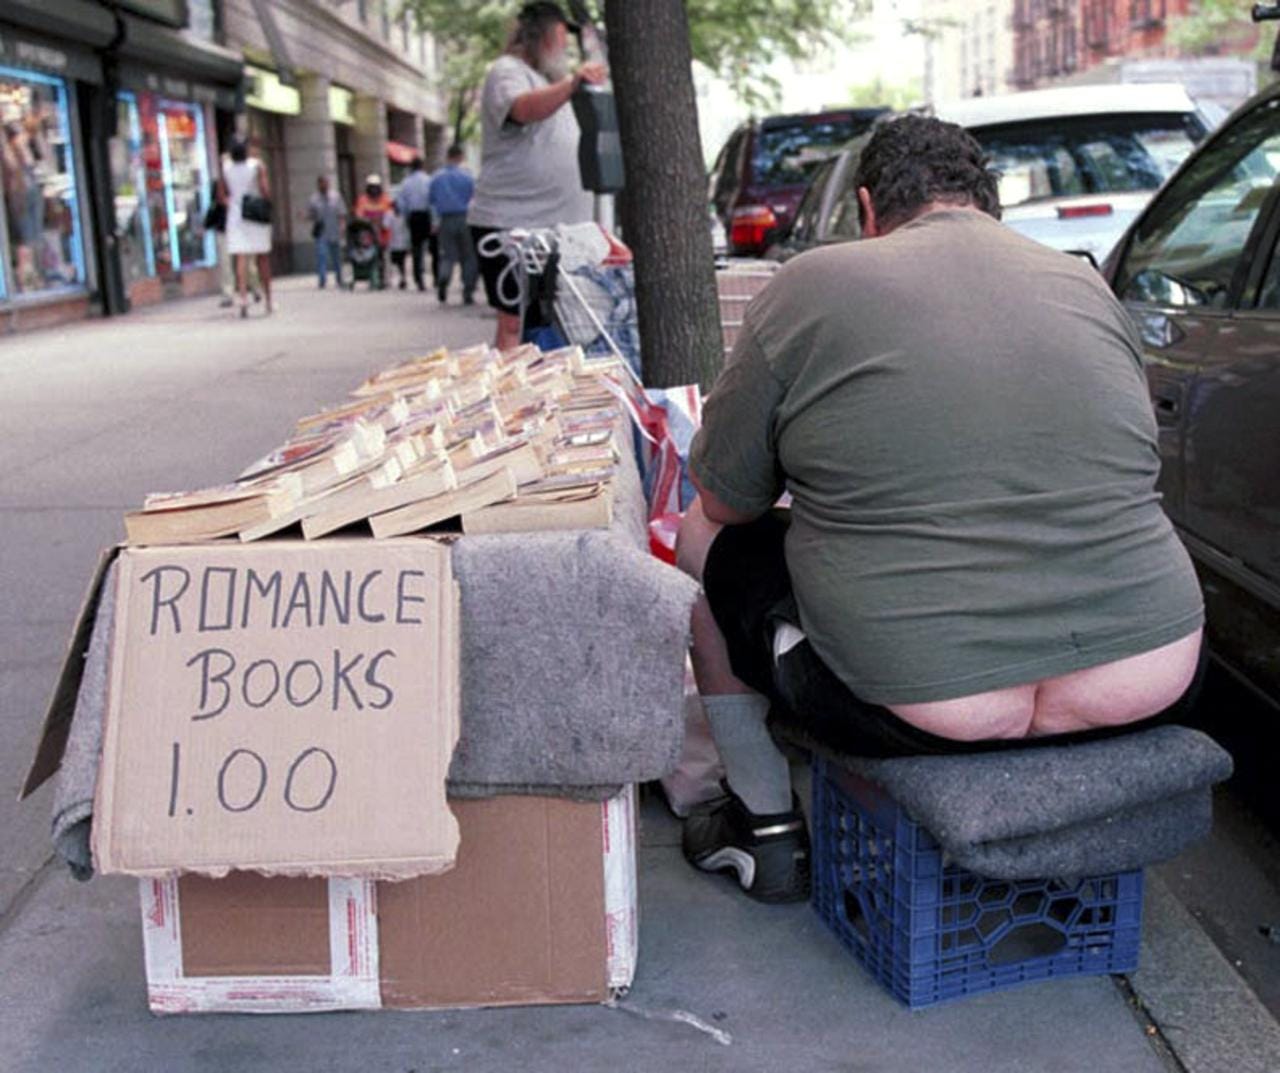 A street book vendor on the Upper West Side gets engrossed in one of his own books for sale.